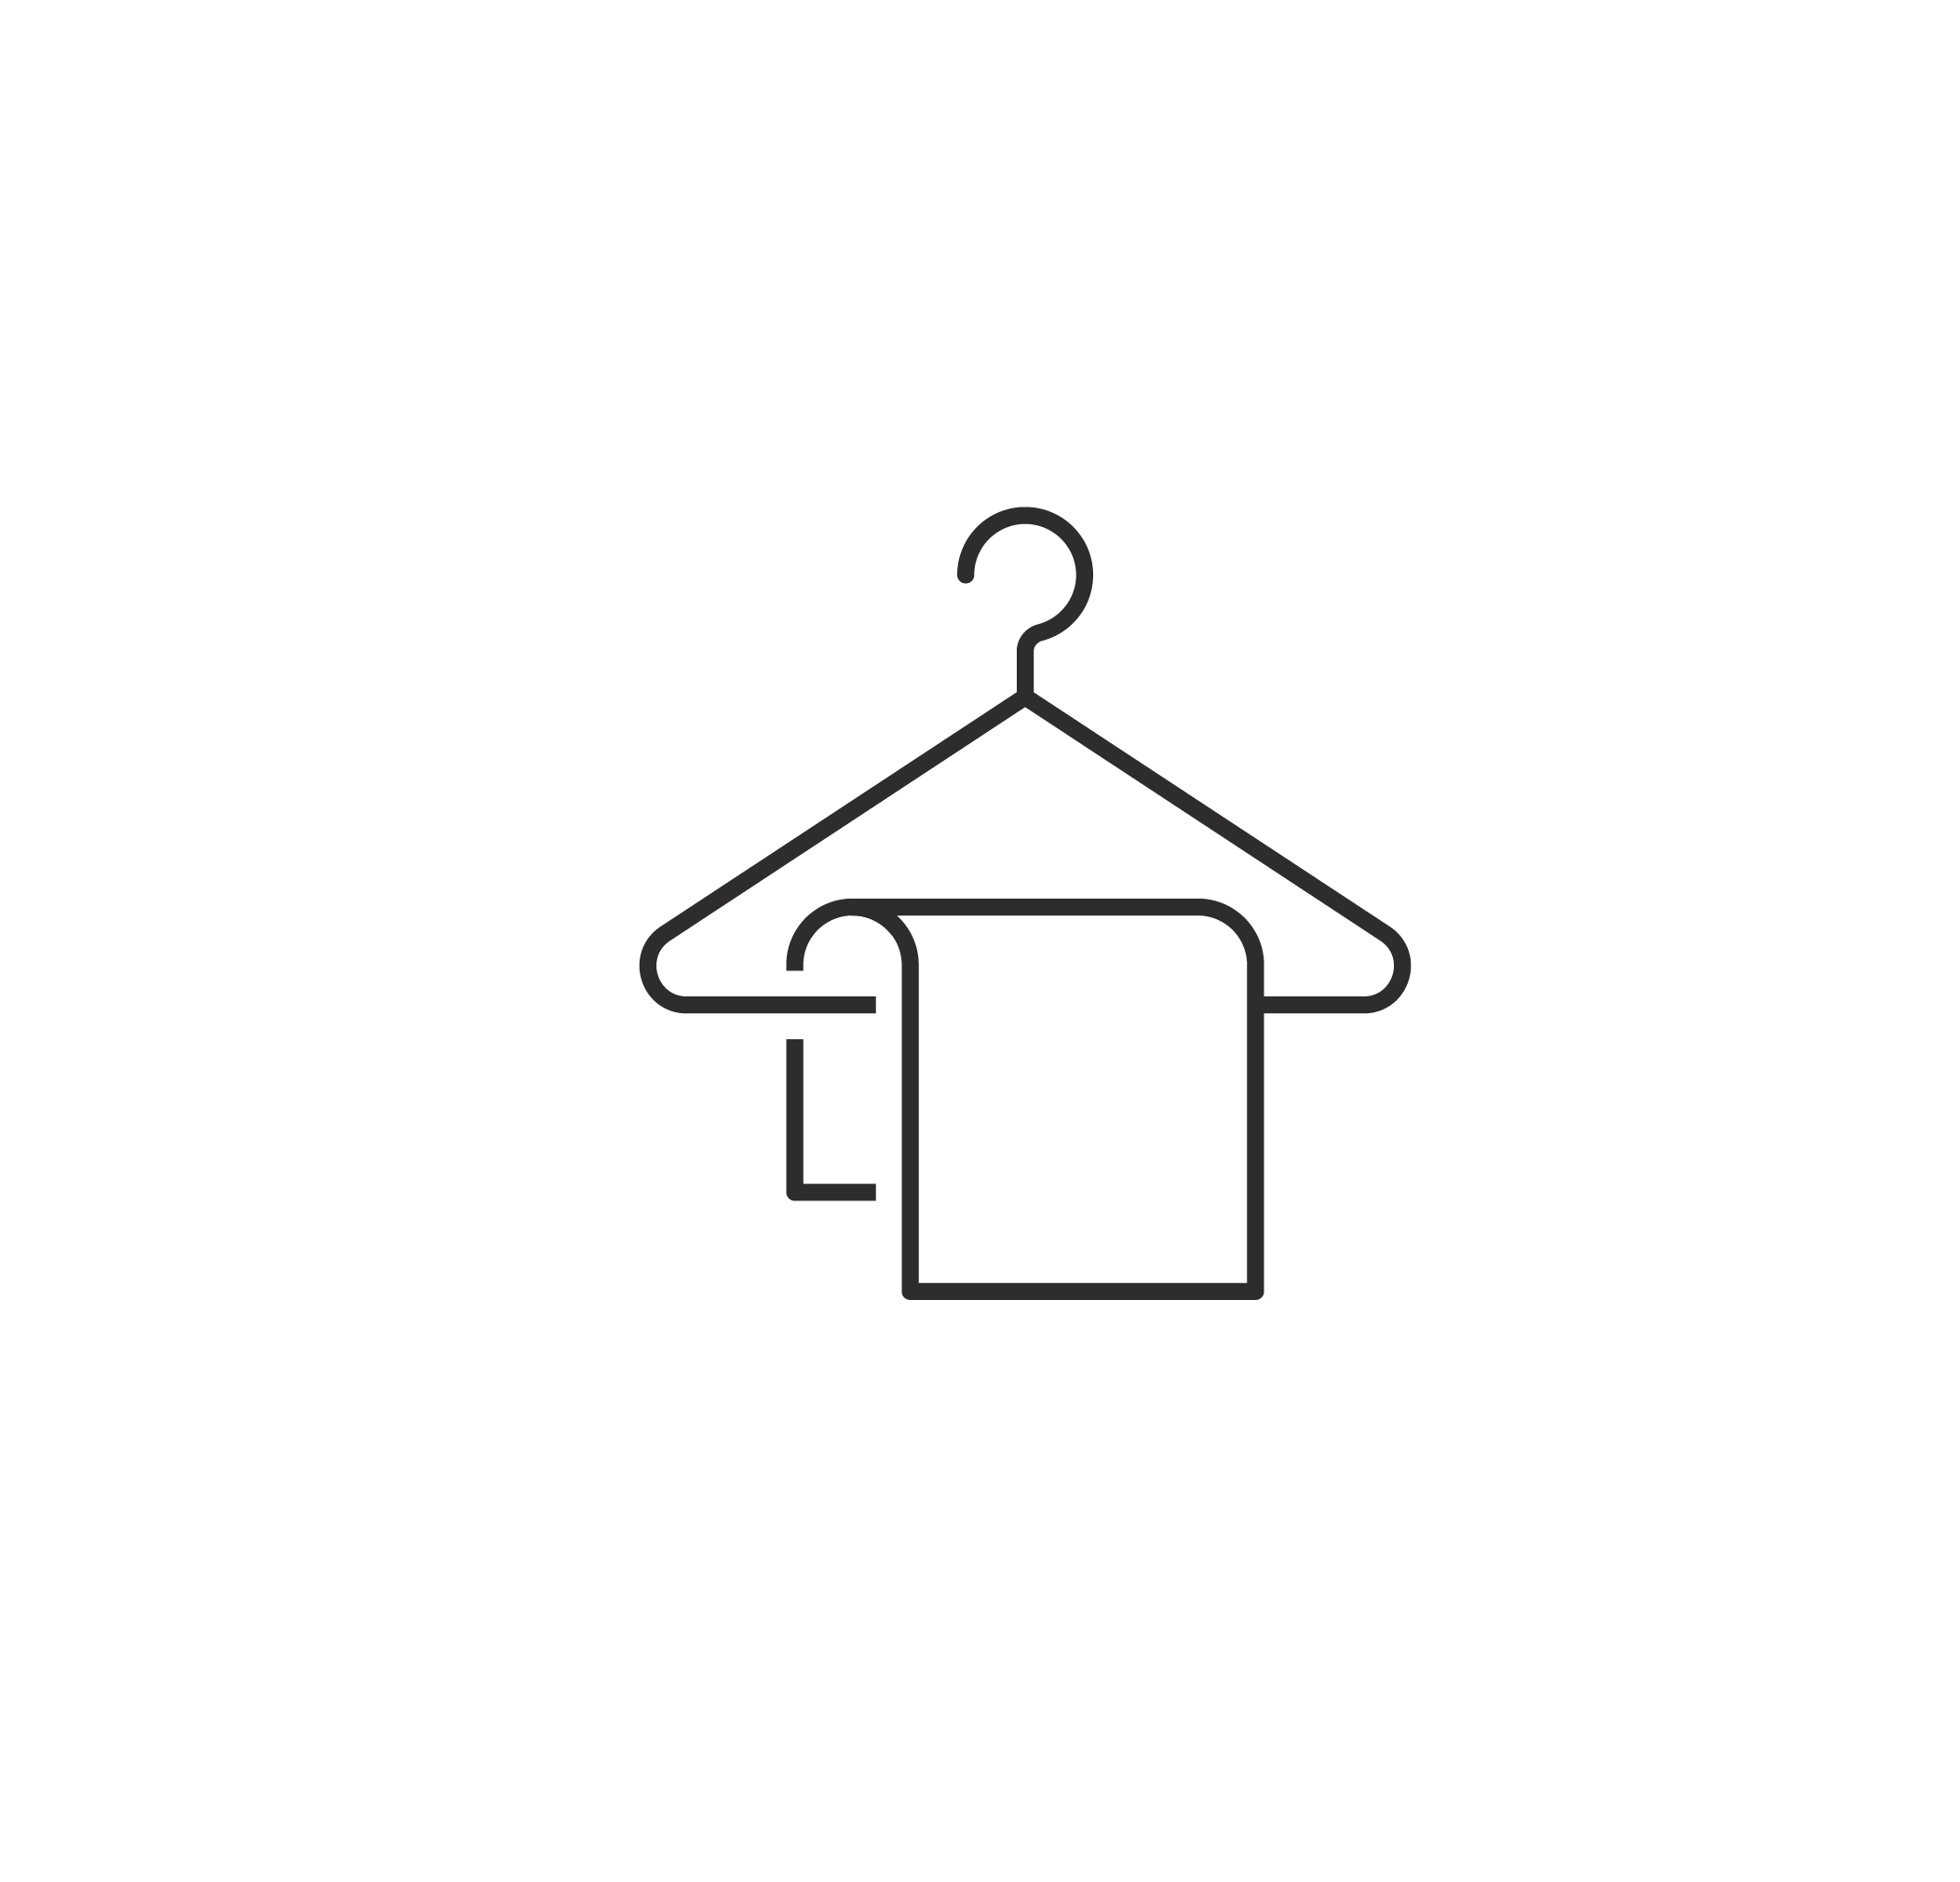 Hanger with towel icon